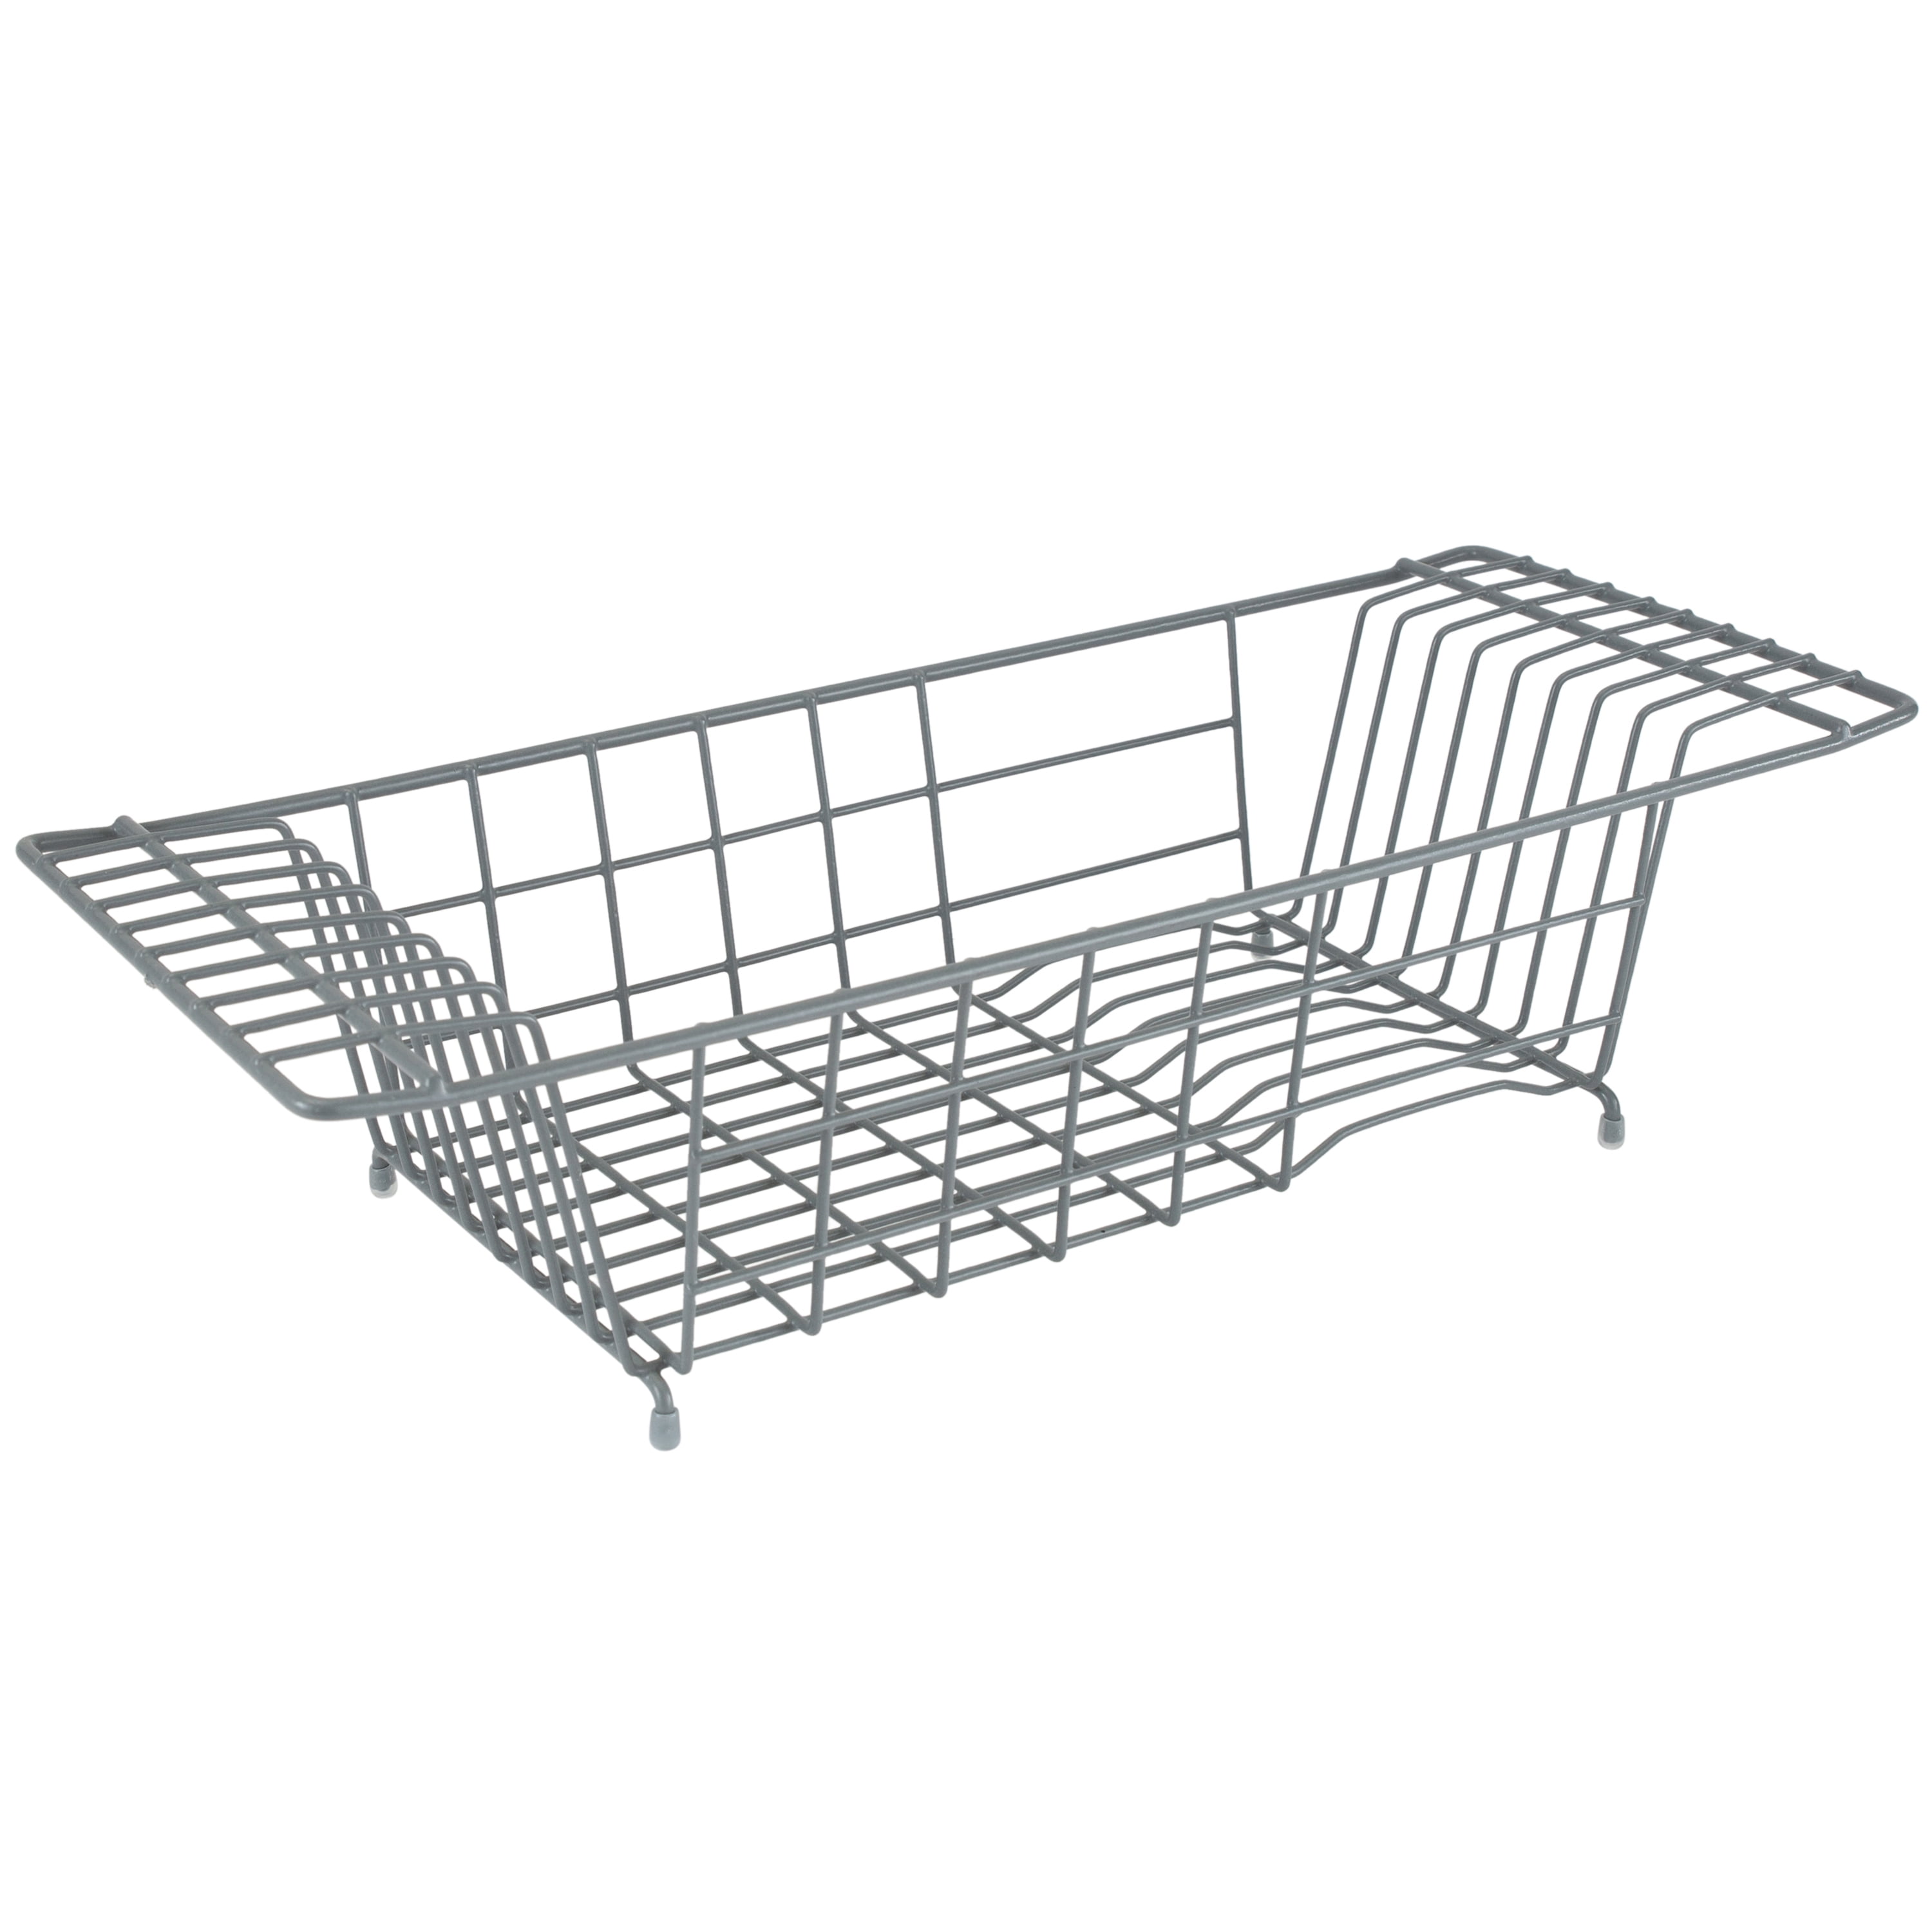 Collapsible Dish Drying Rack For Kitchen Counter, Portable Dish Drainer,  Drying Dish Rack,14.5 x 12.4 x 2-5 inches, Gray